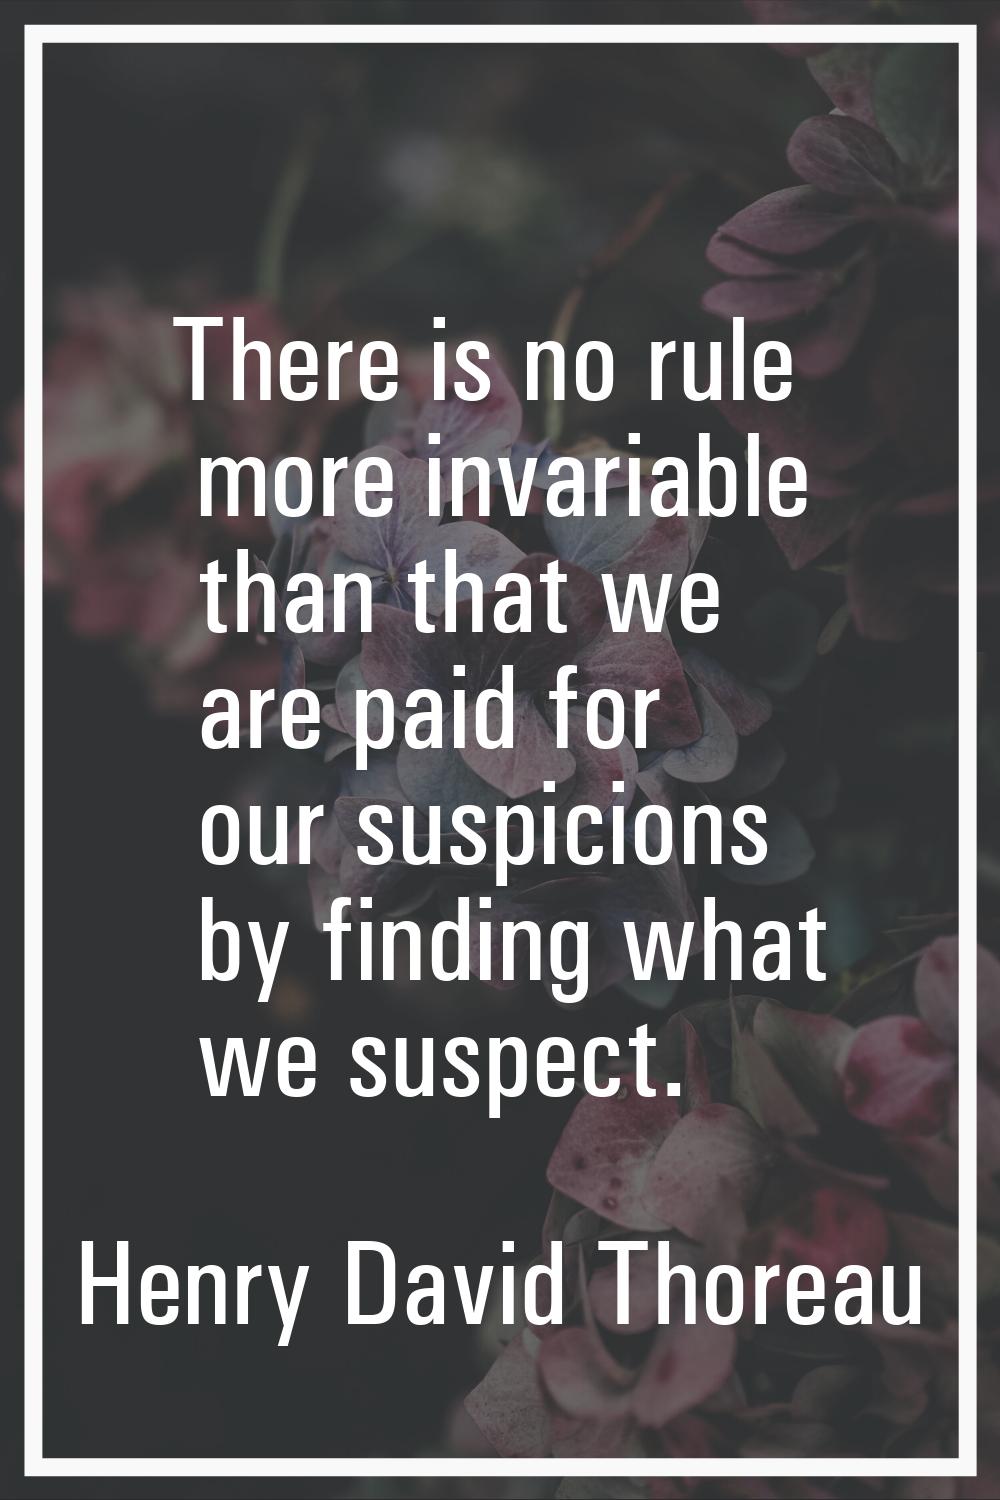 There is no rule more invariable than that we are paid for our suspicions by finding what we suspec